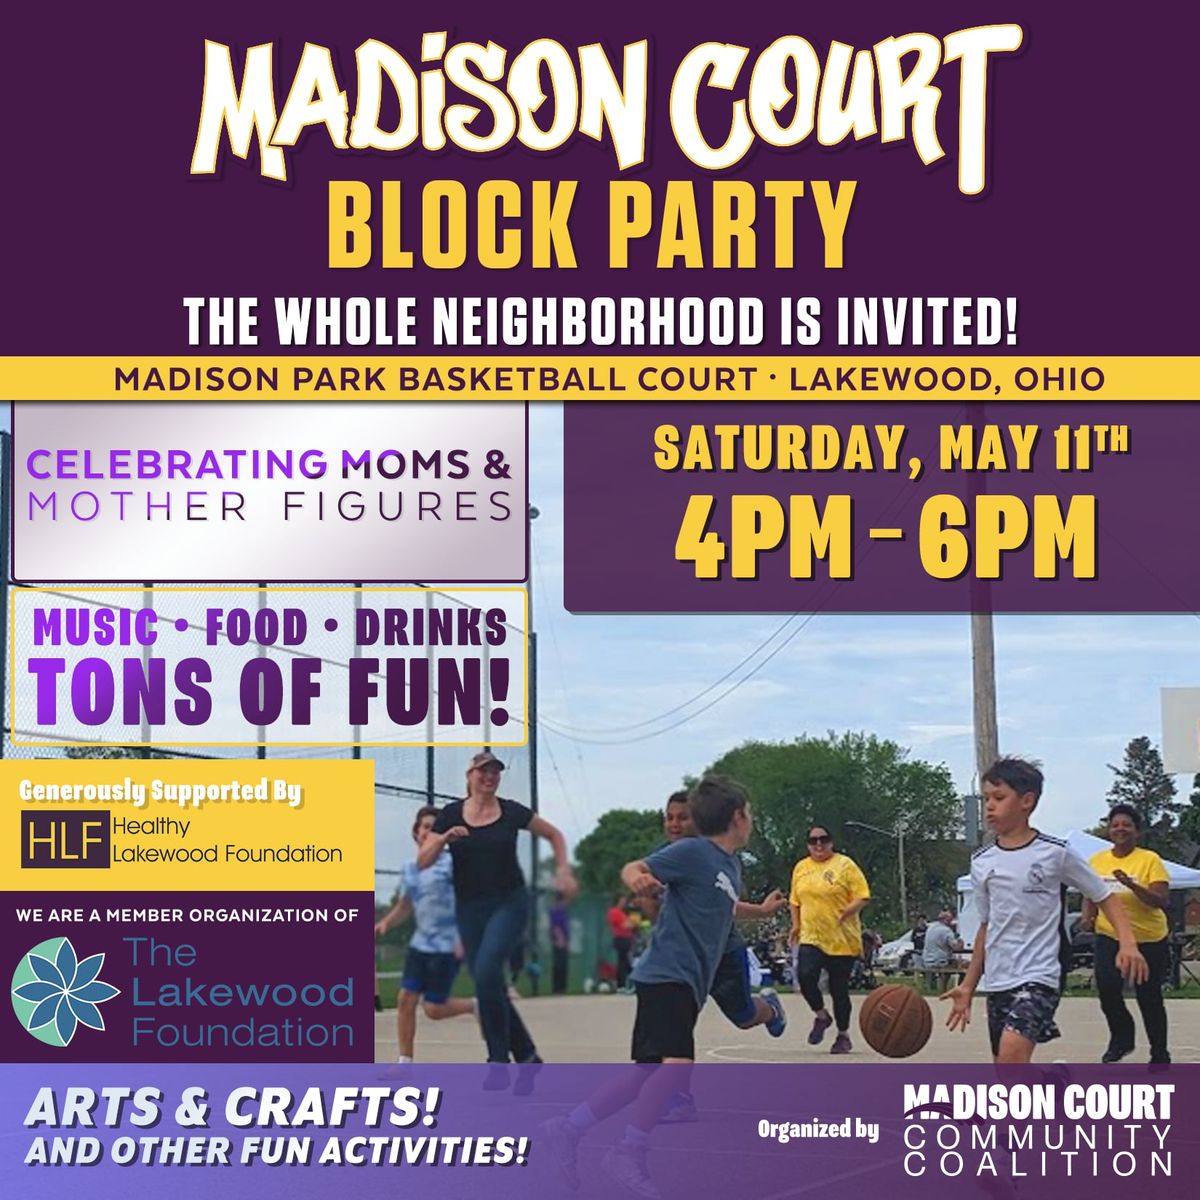 Madison Court Block Party May 11th